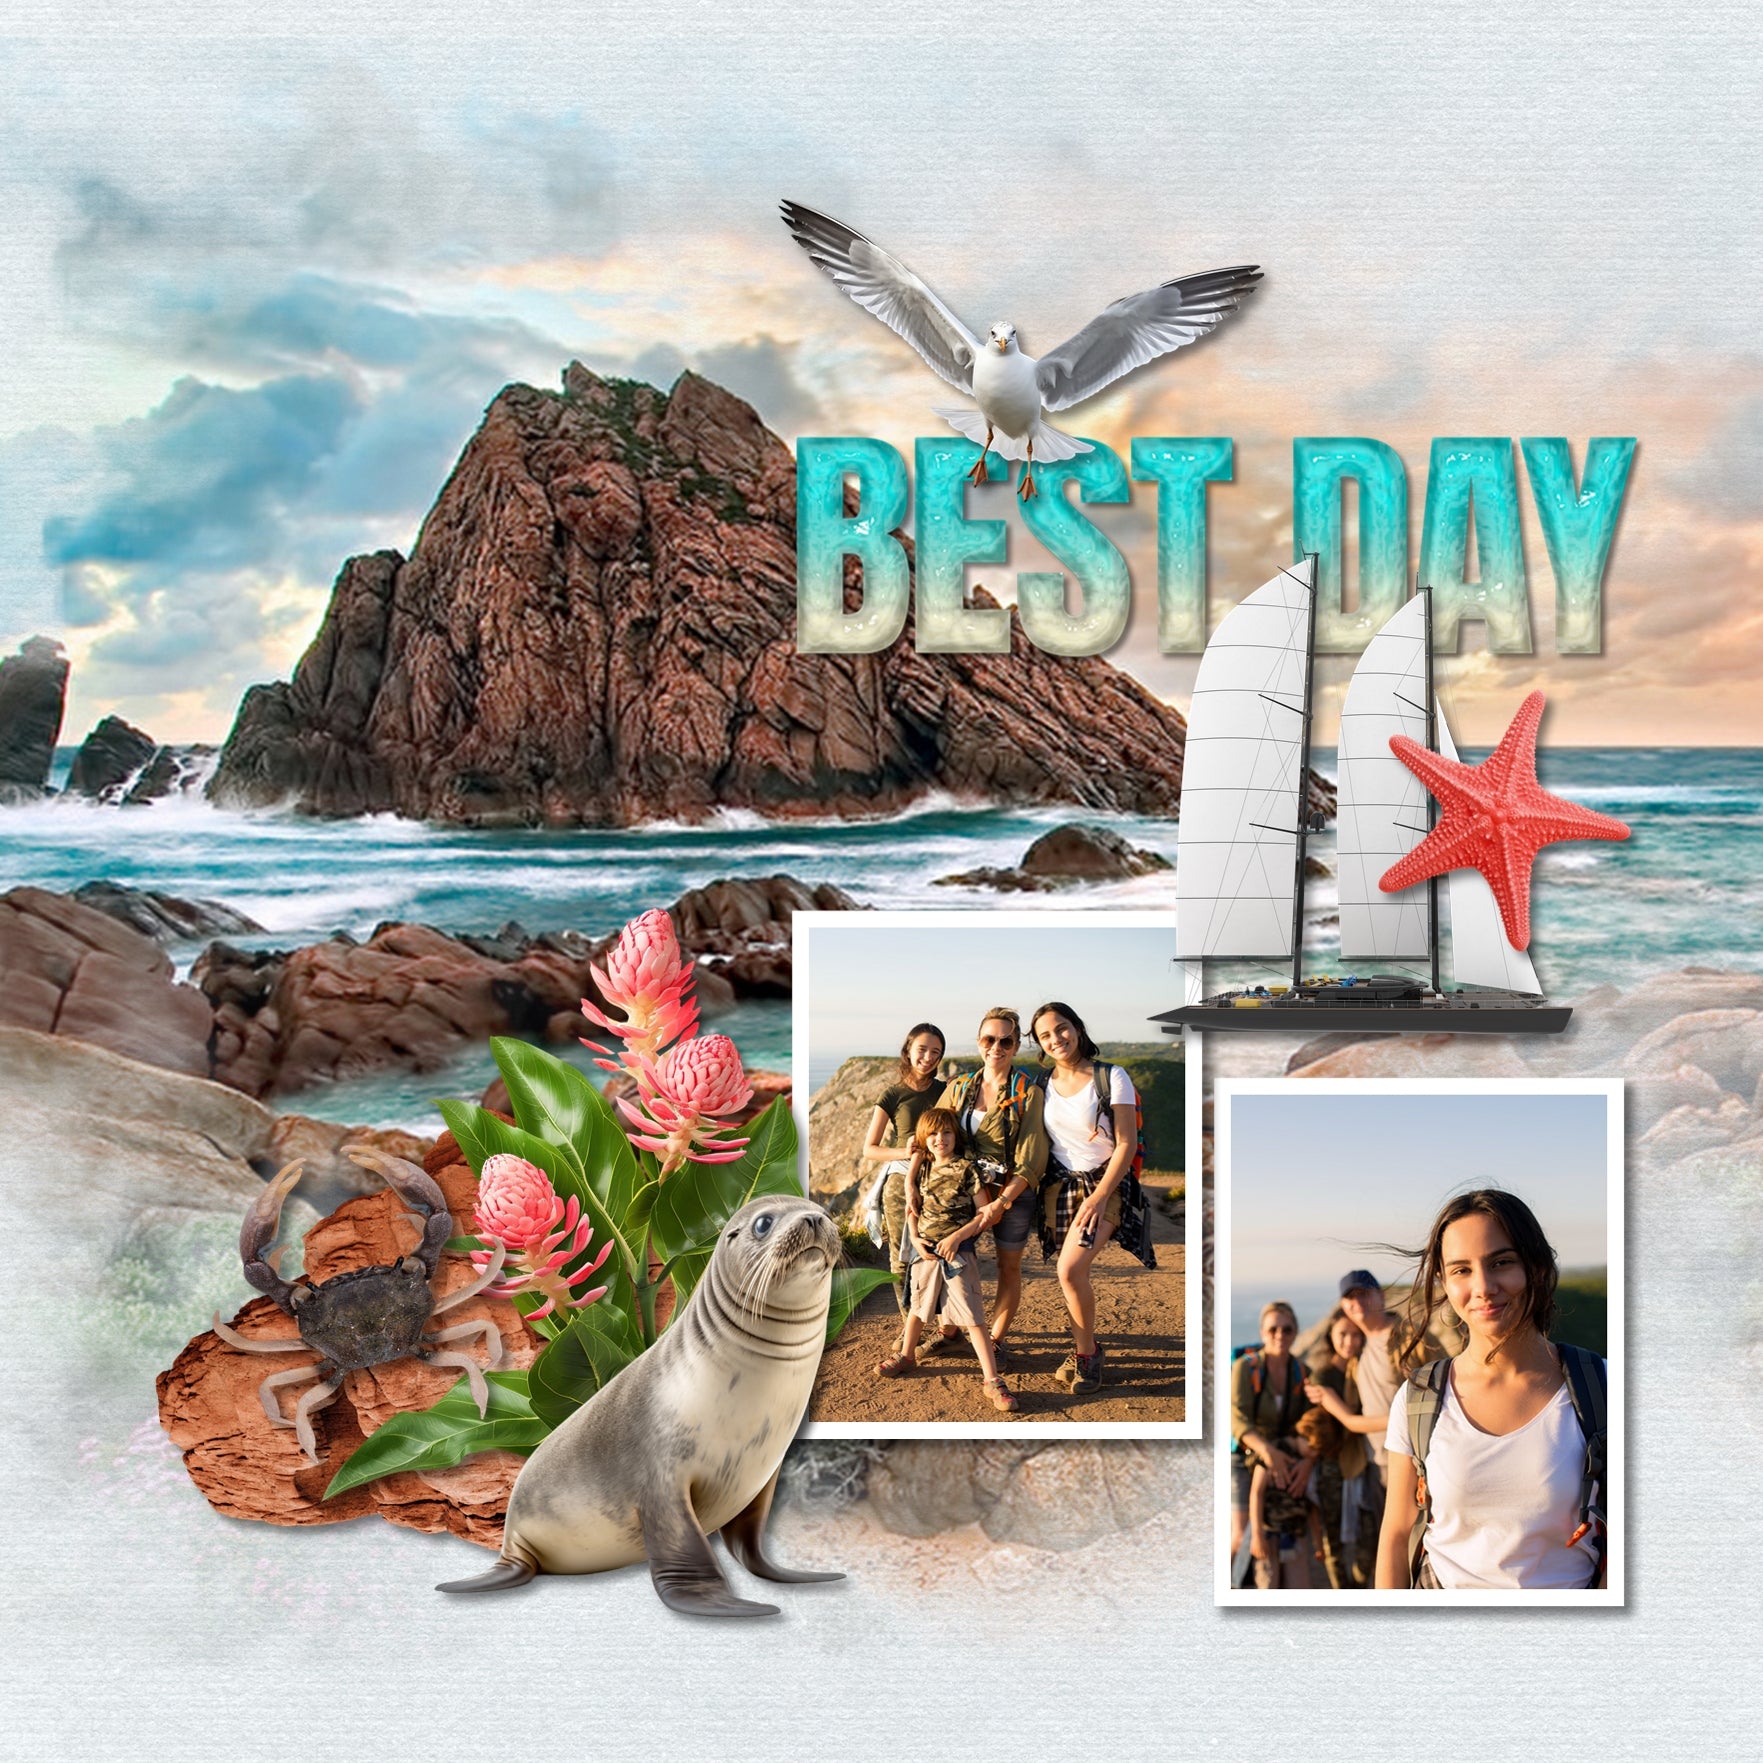 Highlight your vacation memories with these realistic digital scrapbooking art embellishments. Great for holidays to Australia and New Zealand and exploring indigenous life as well as the native flowers and plants of Australia! Can be used for tropical pages, too! Embellishments include animal, bird, Black Kite, Emu, Guineafowl, King Fisher, parrot, Kiwi bird, Kookaburra, Magpie, penguin, crab, crocodile, echidna, kangaroo, and koala.